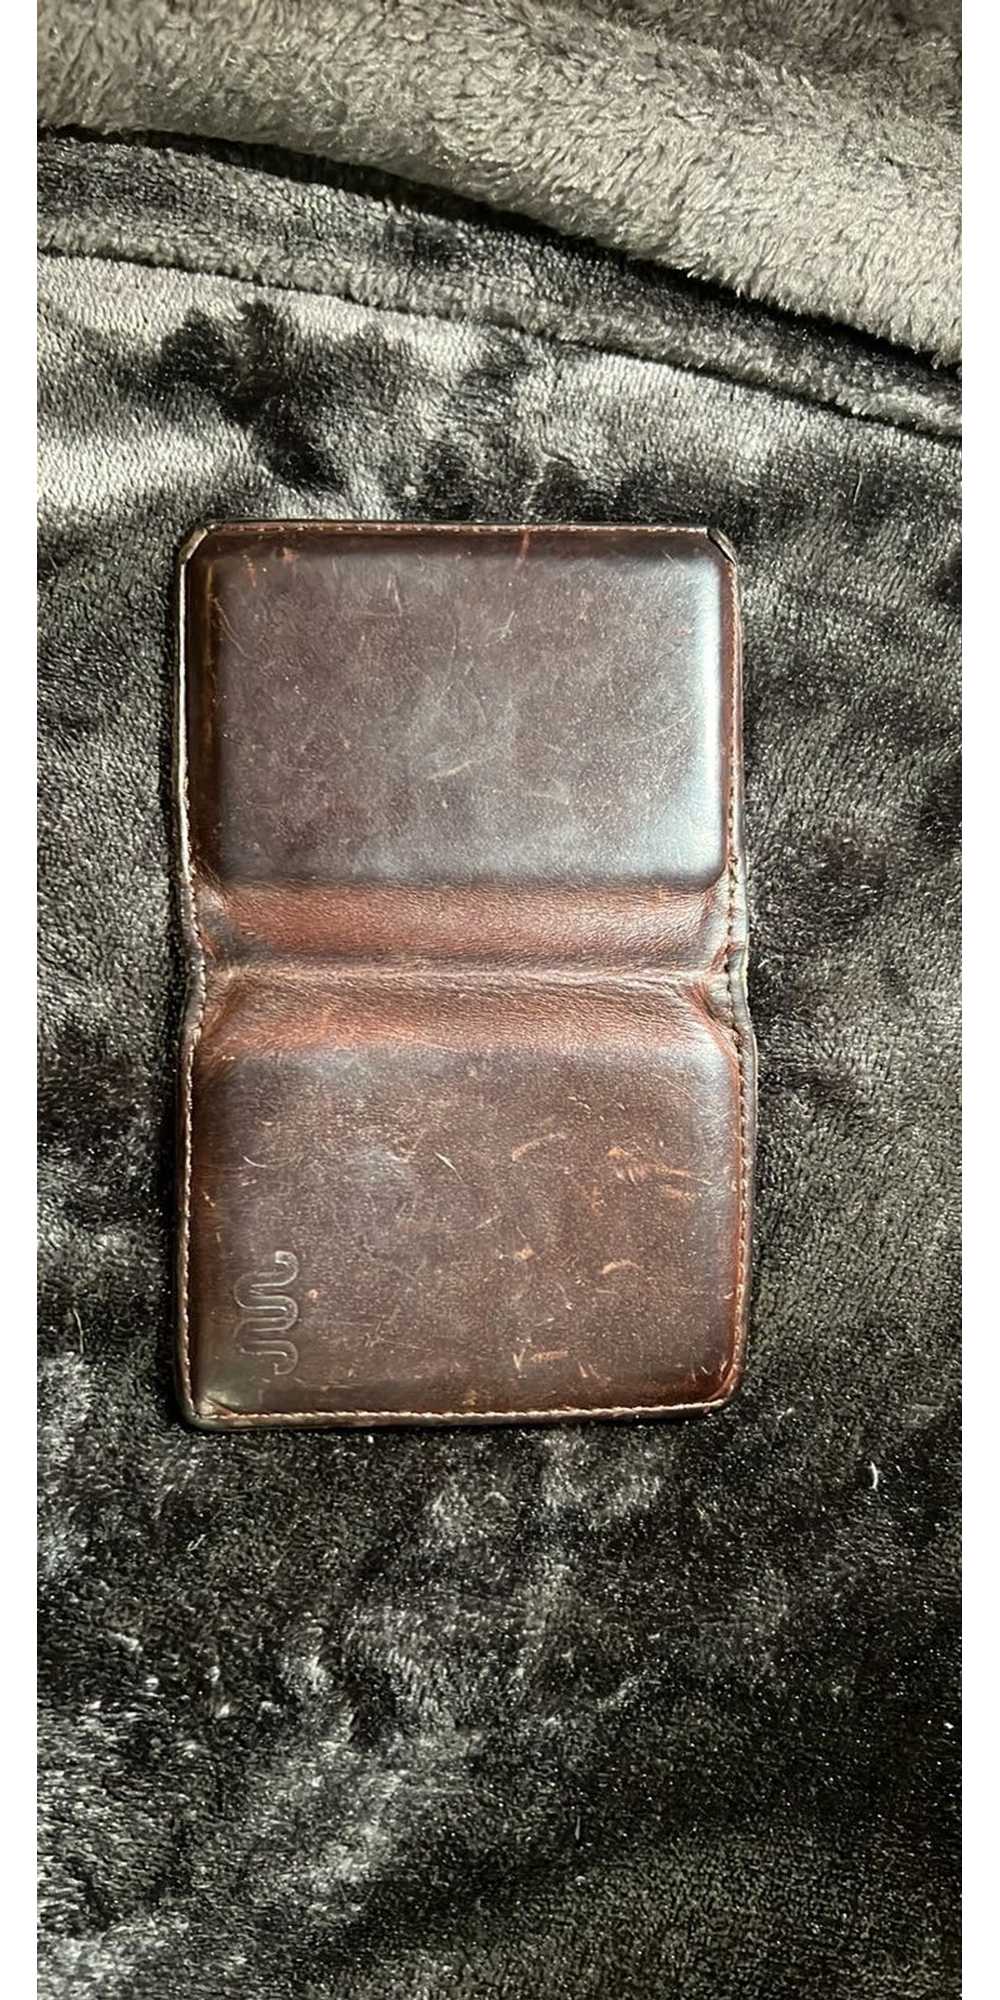 Other King Ranch Front pocket wallet - image 1